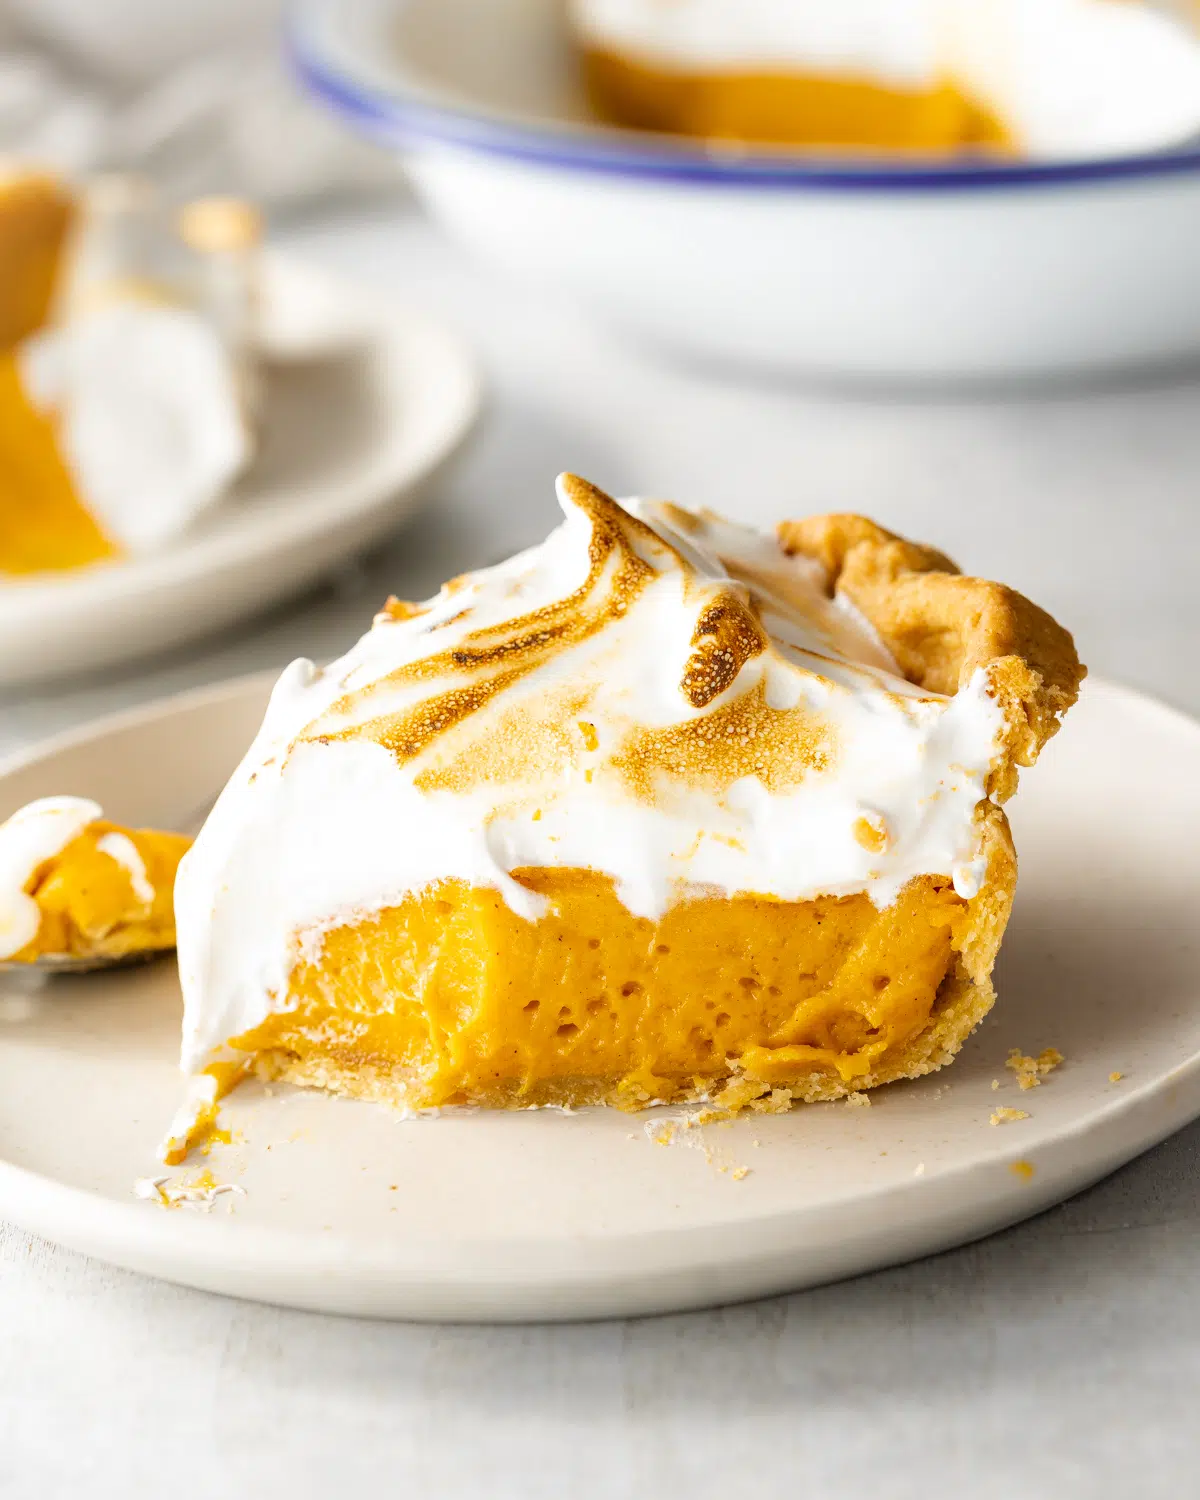 slice of sweet potato pie with meringue topping on a plate with a bite taken from it.